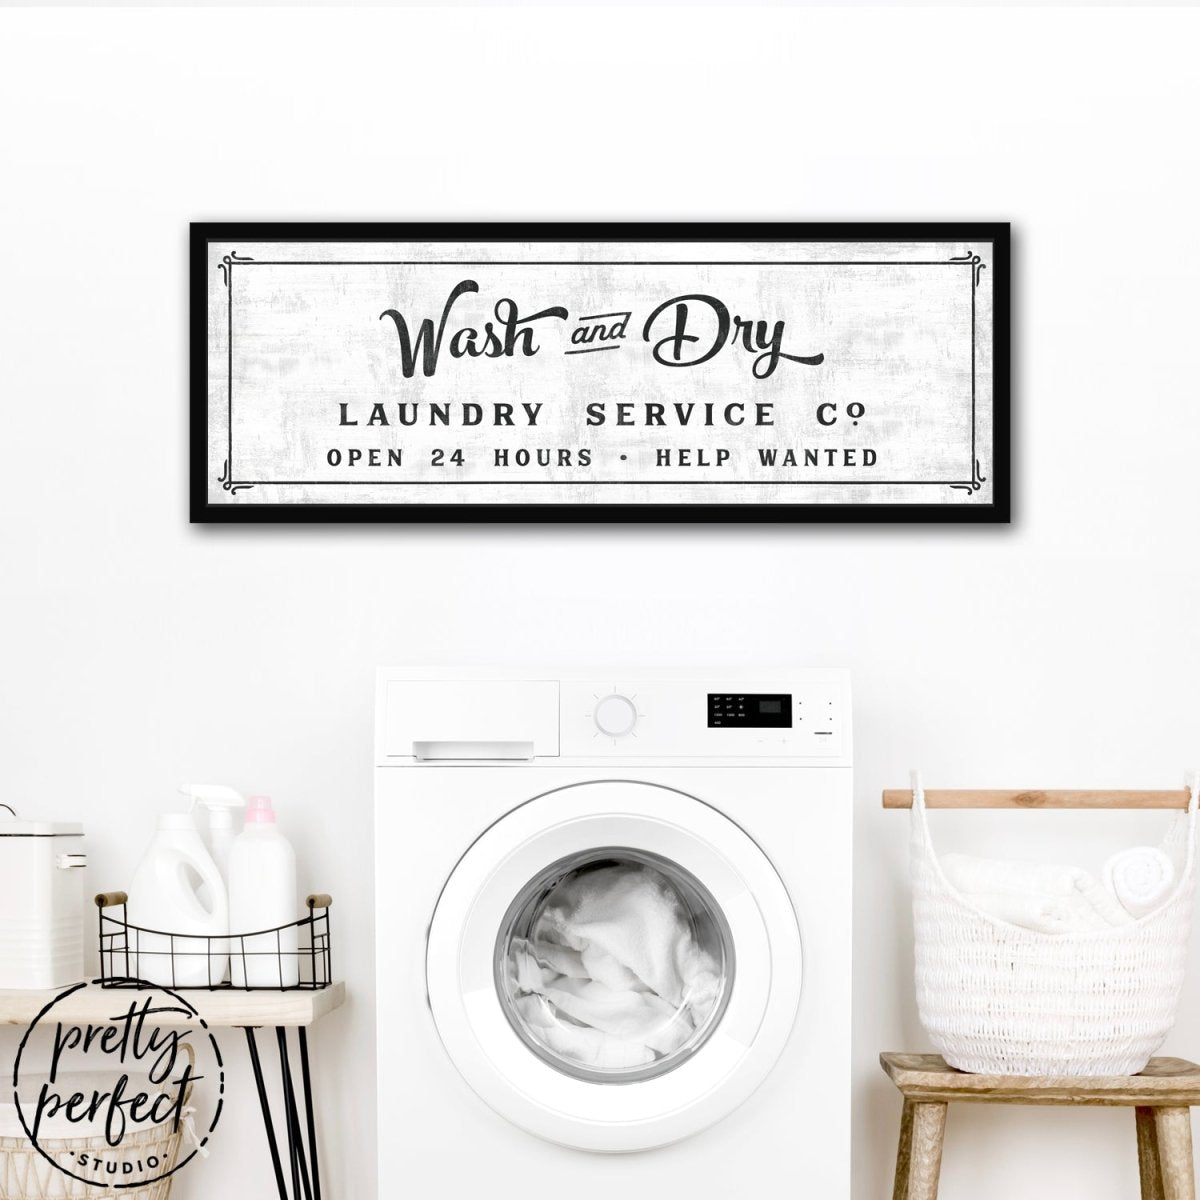 Wash and Dry Laundry Room Sign Hanging on Wall Above Washer - Pretty Perfect Studio